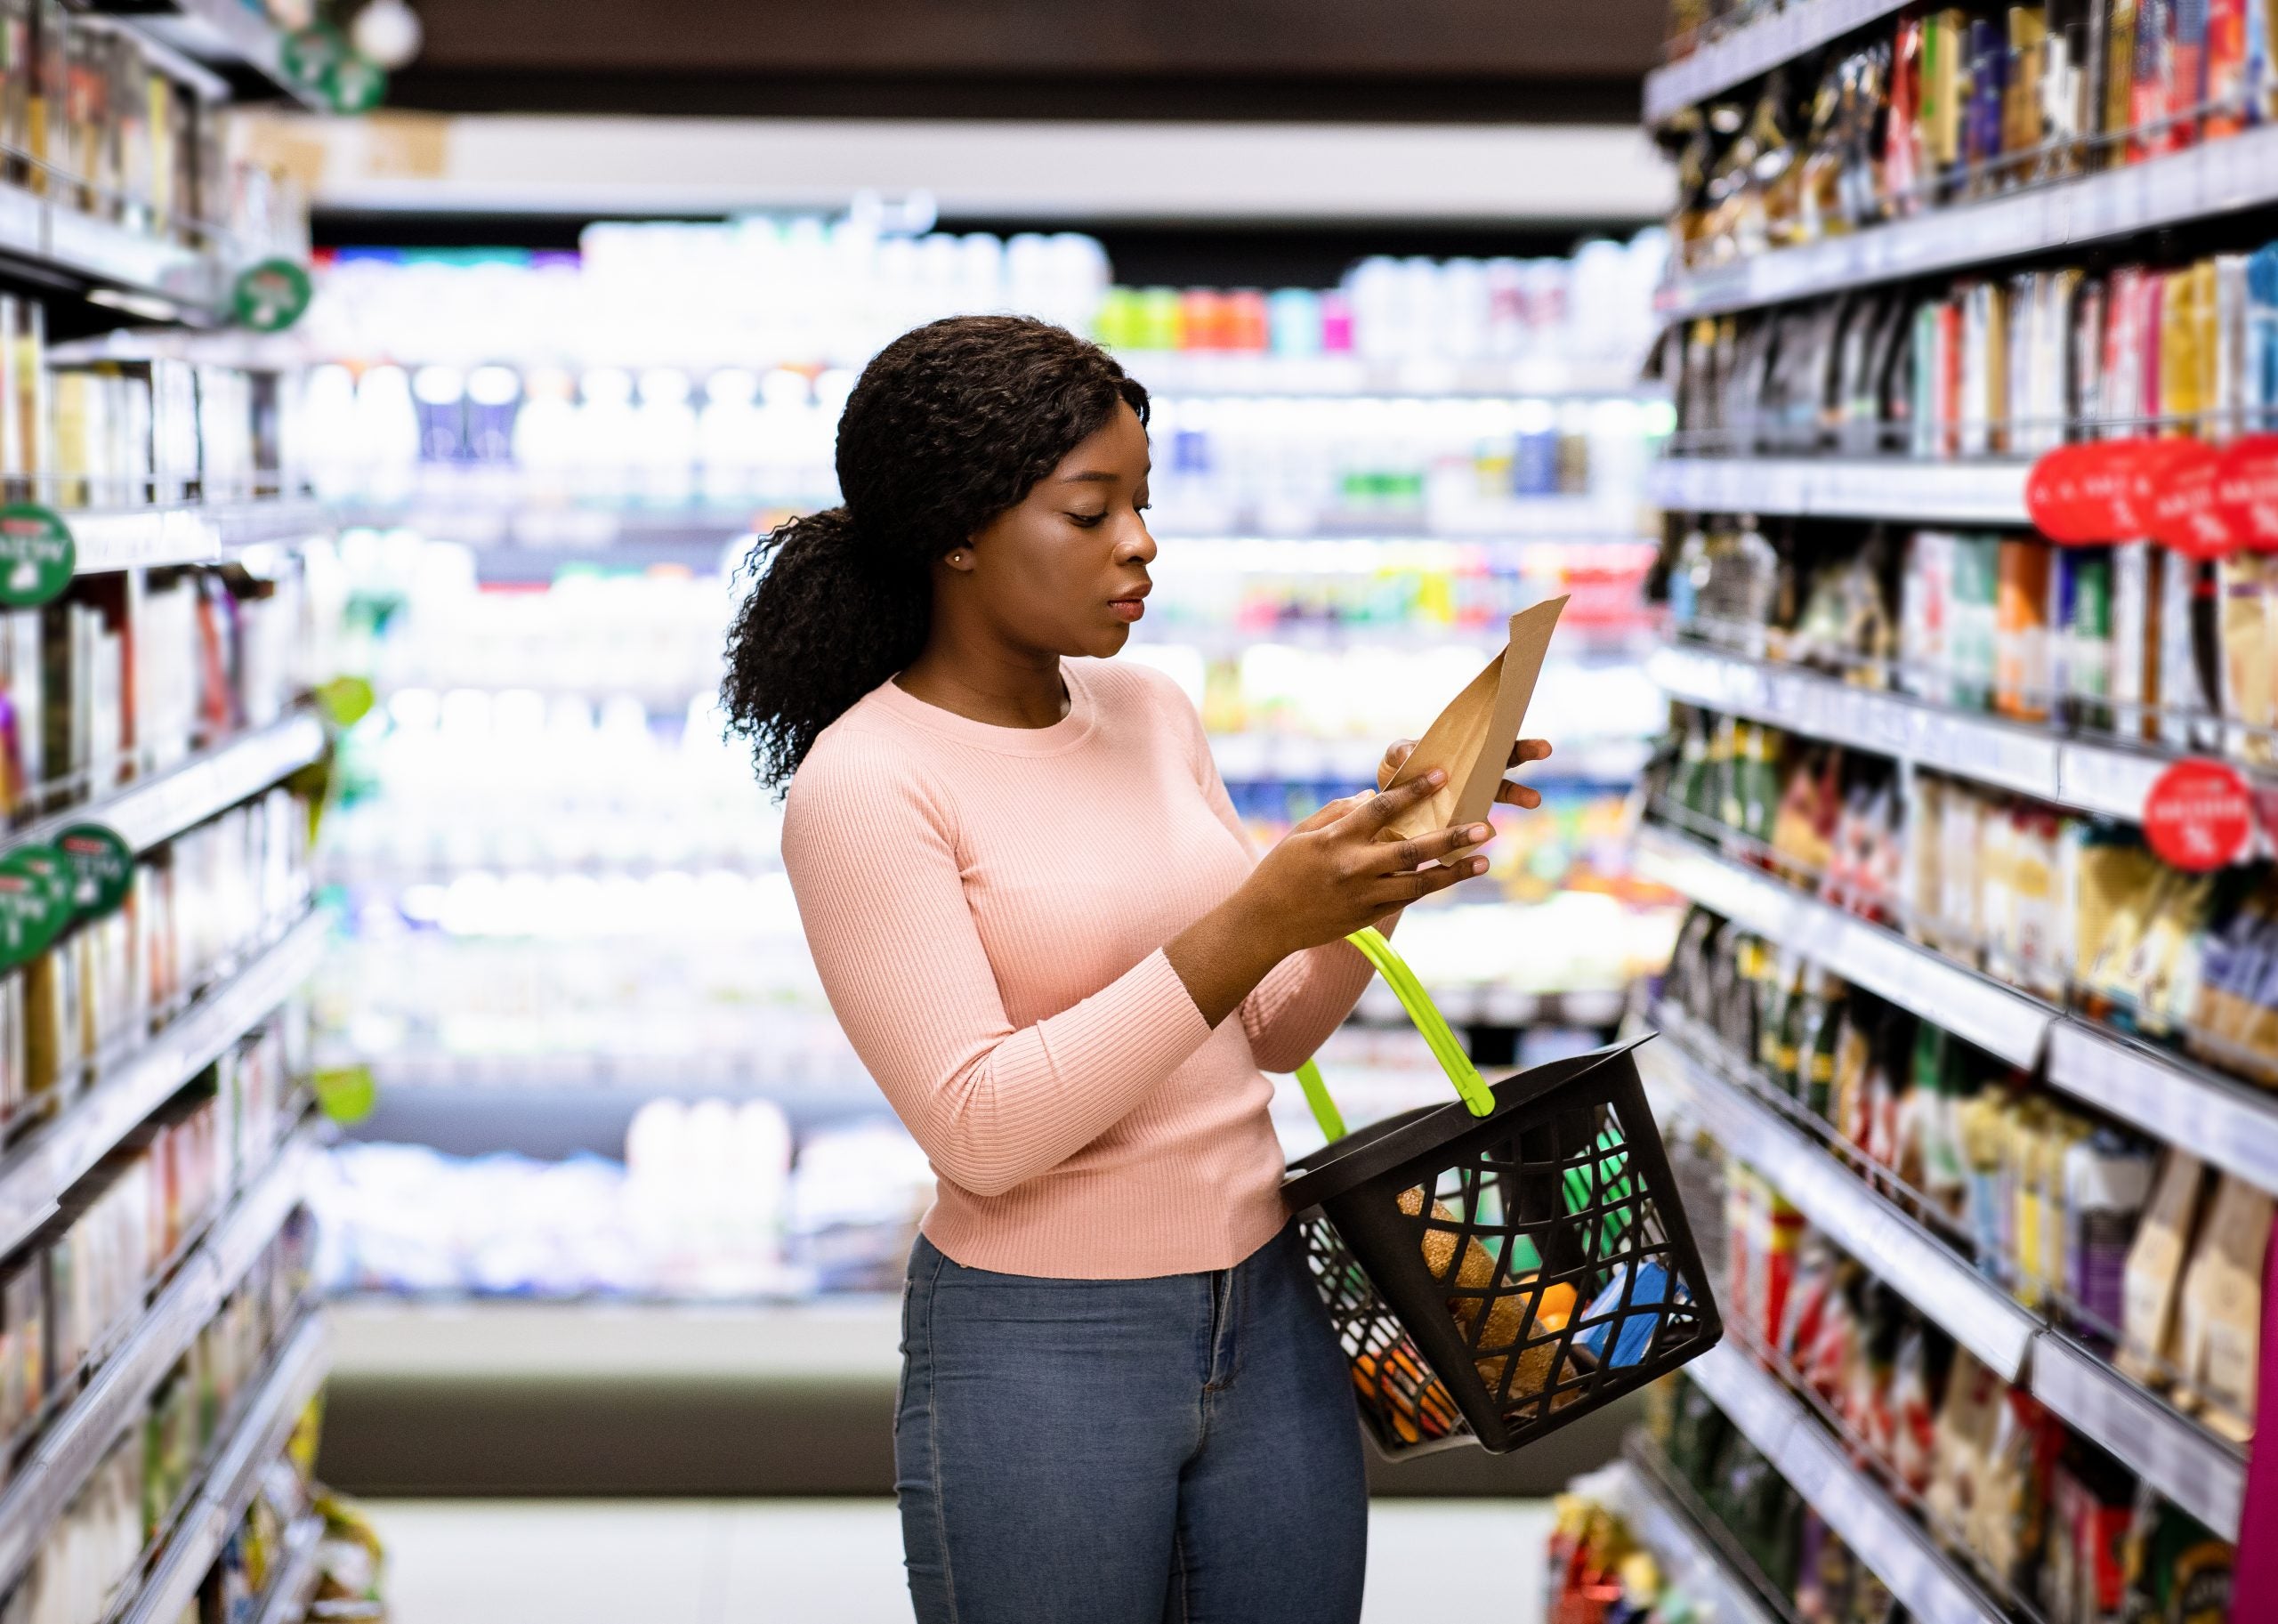 A women grocery shopping and looking at the label on a package of food in her hand